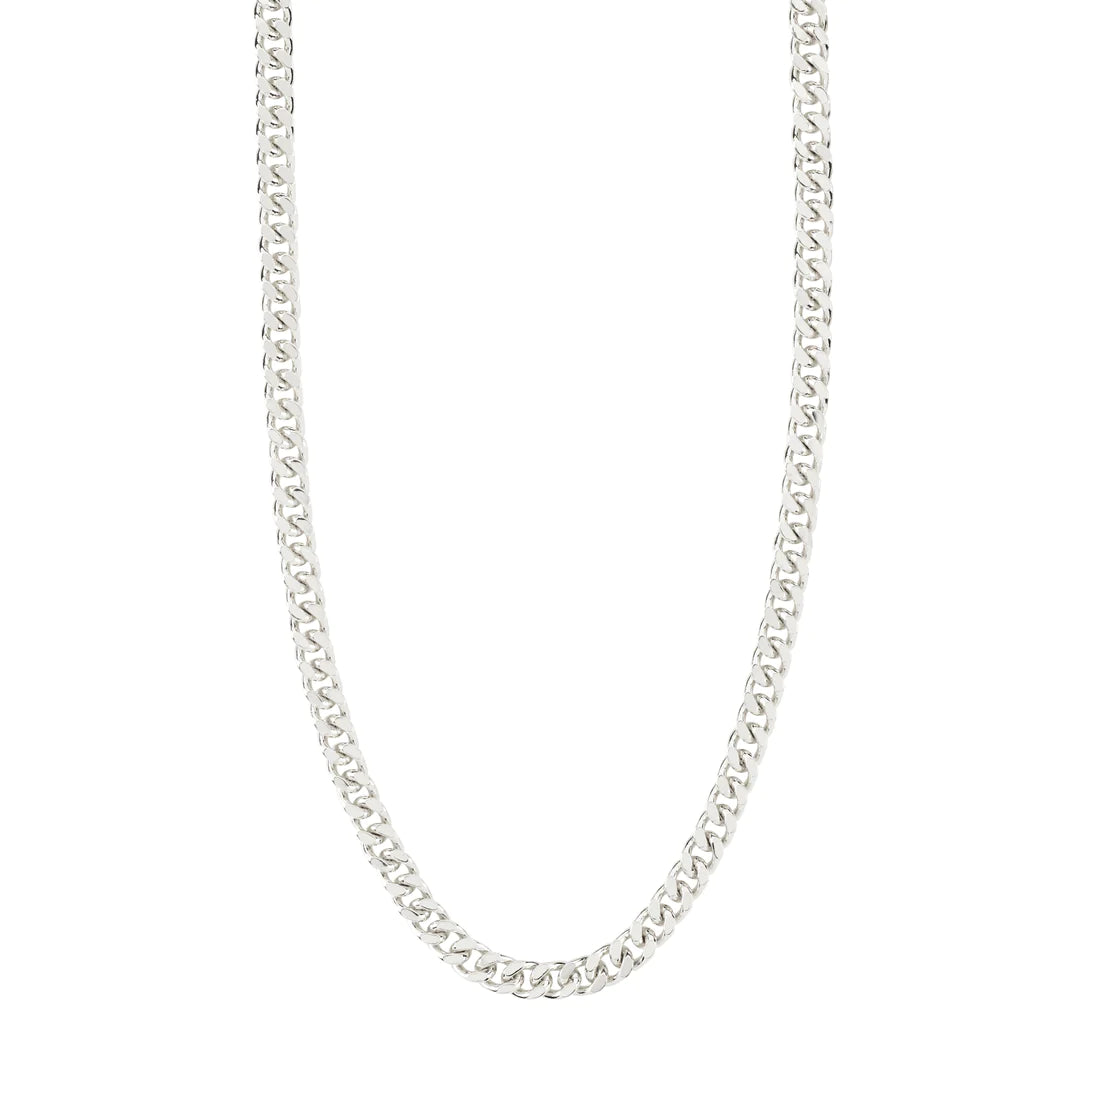 Heat Chain Necklace - silver